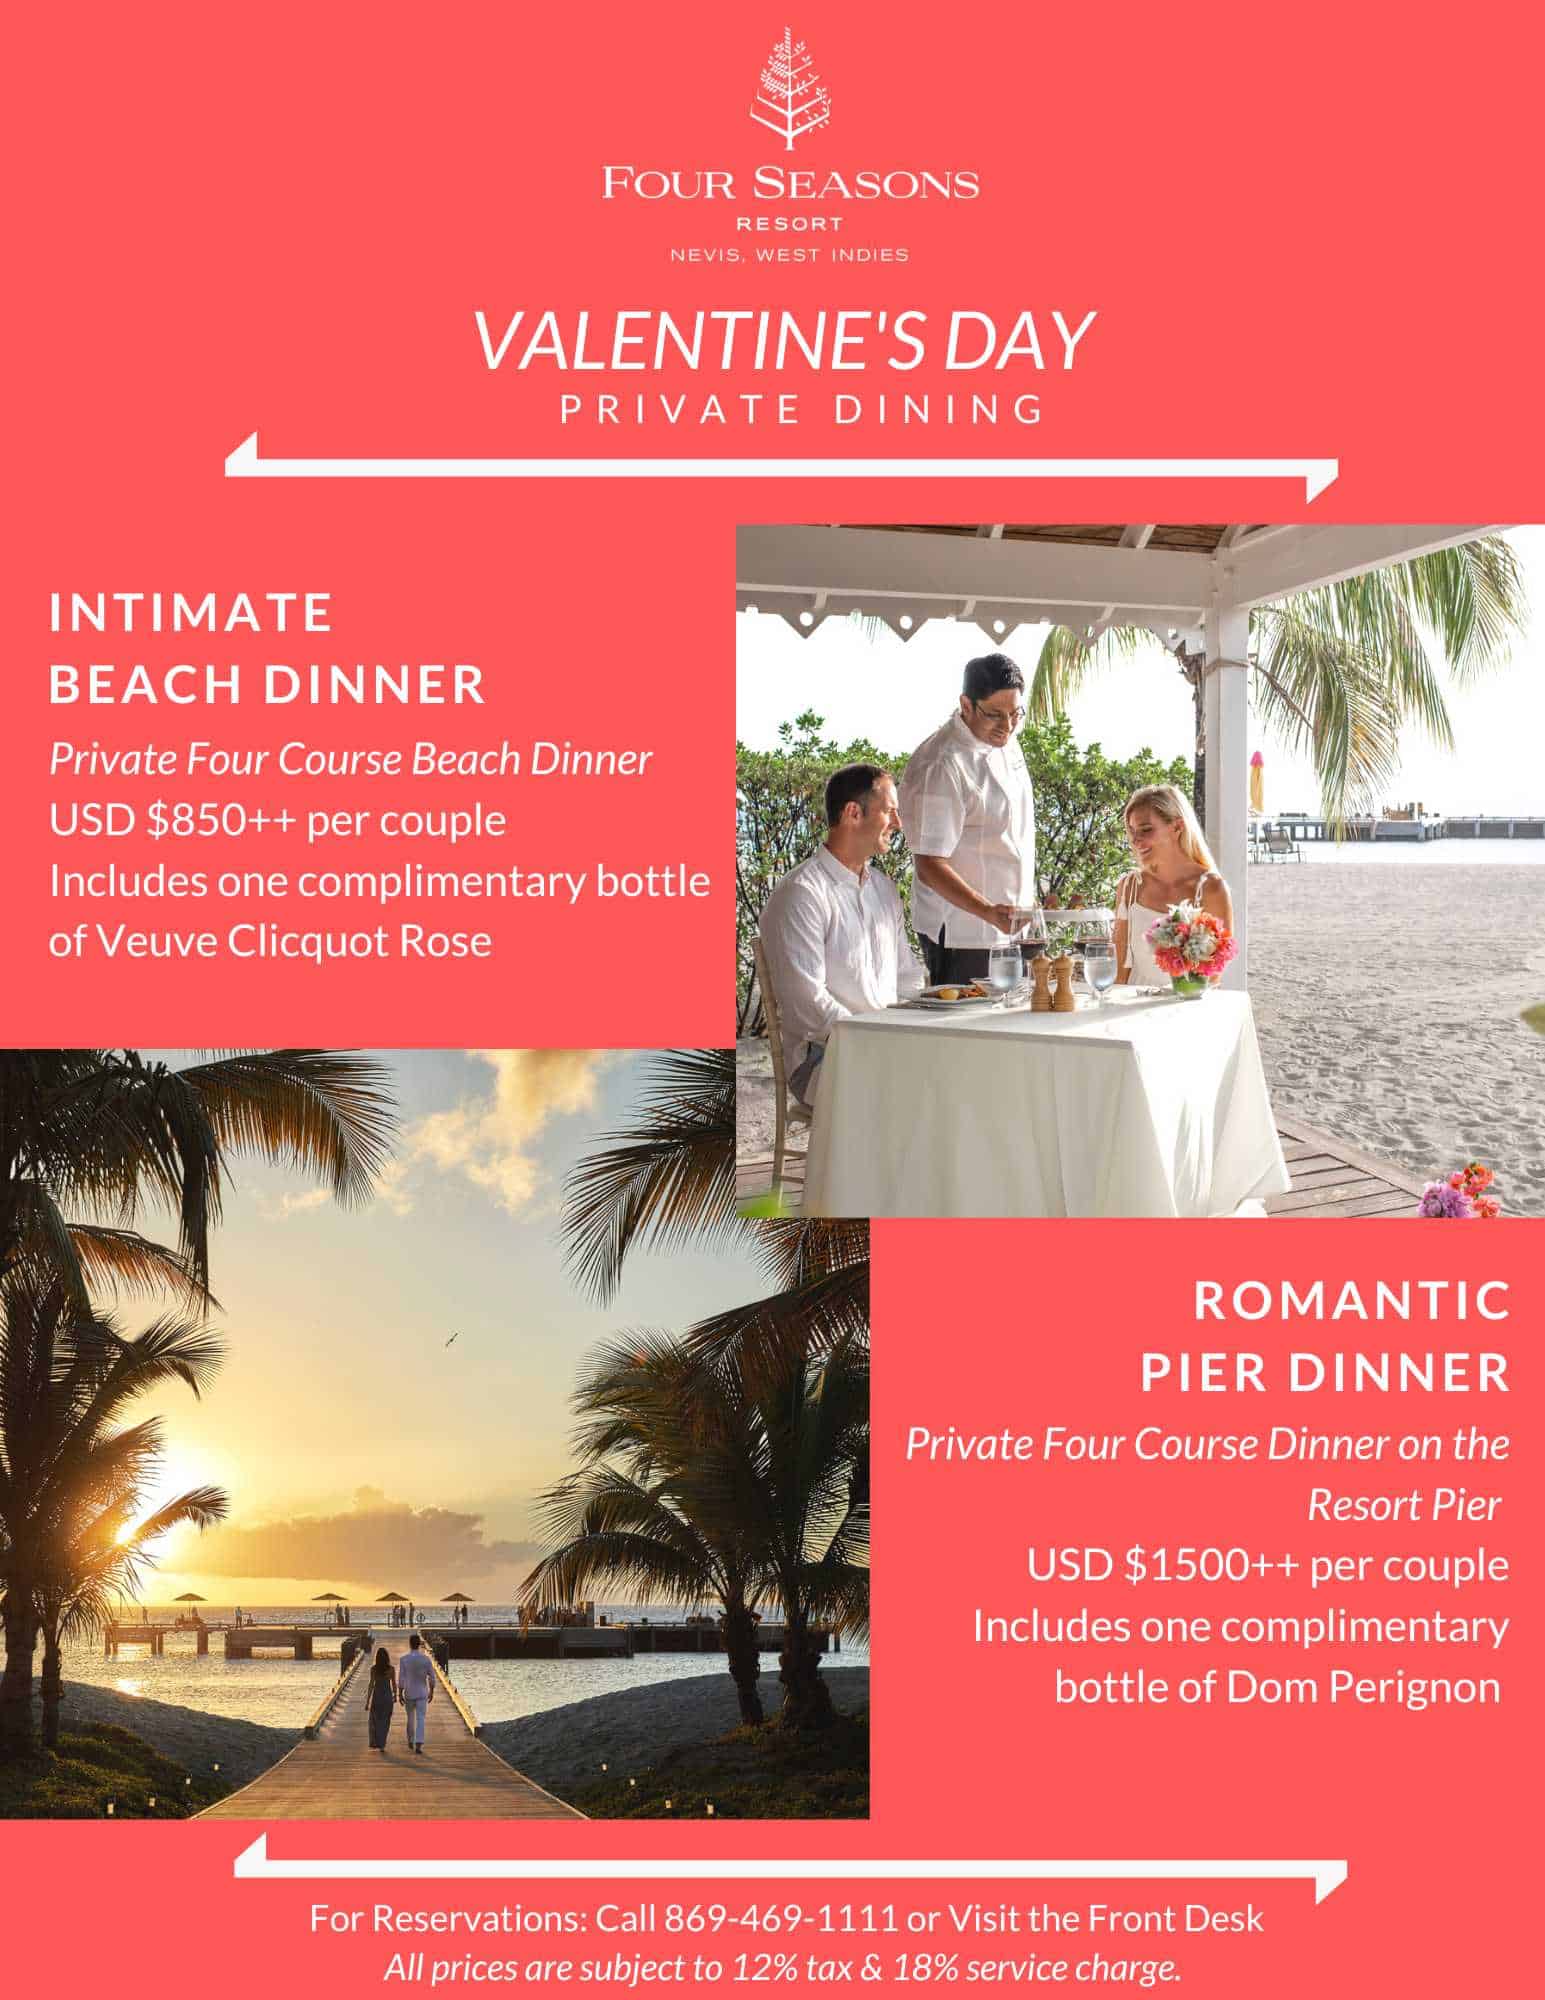 Valentine's Day Private Dining at Four Seasons Resort Nevis